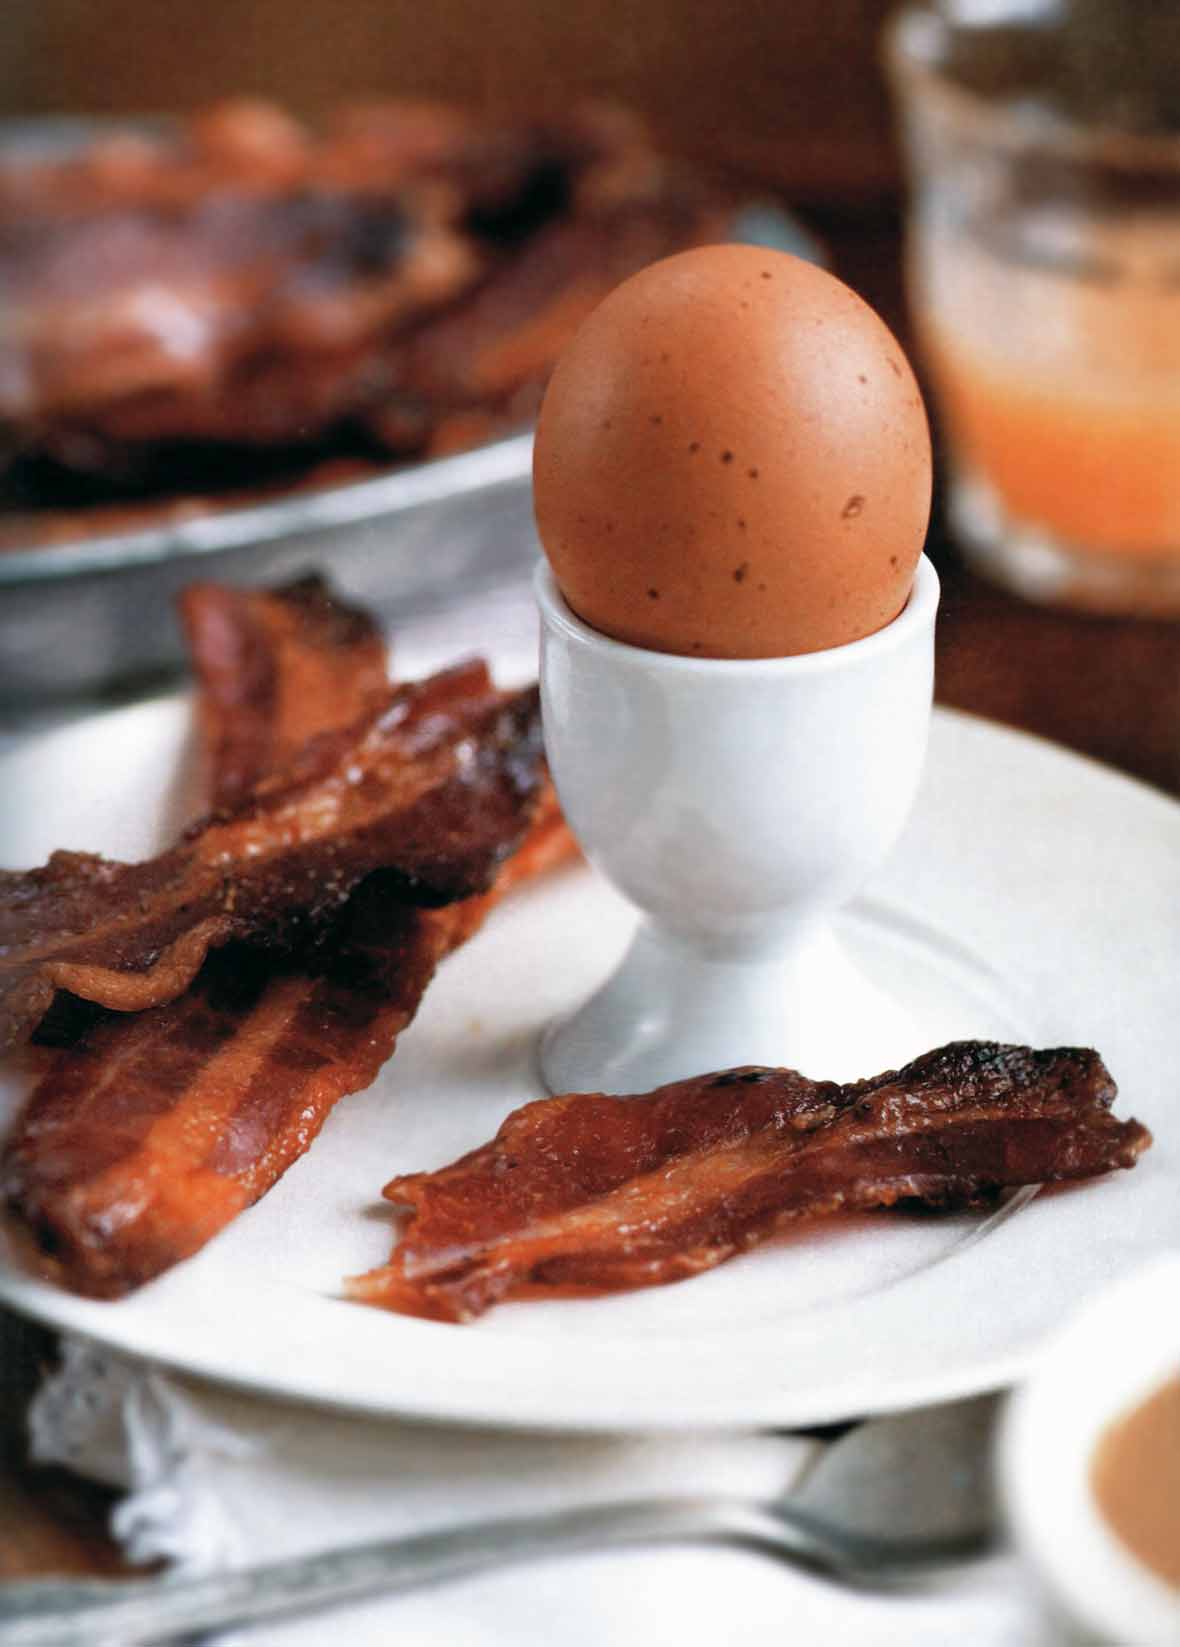 Three strips of maple candied bacon on a white plate along with a boiled egg in an egg cup.